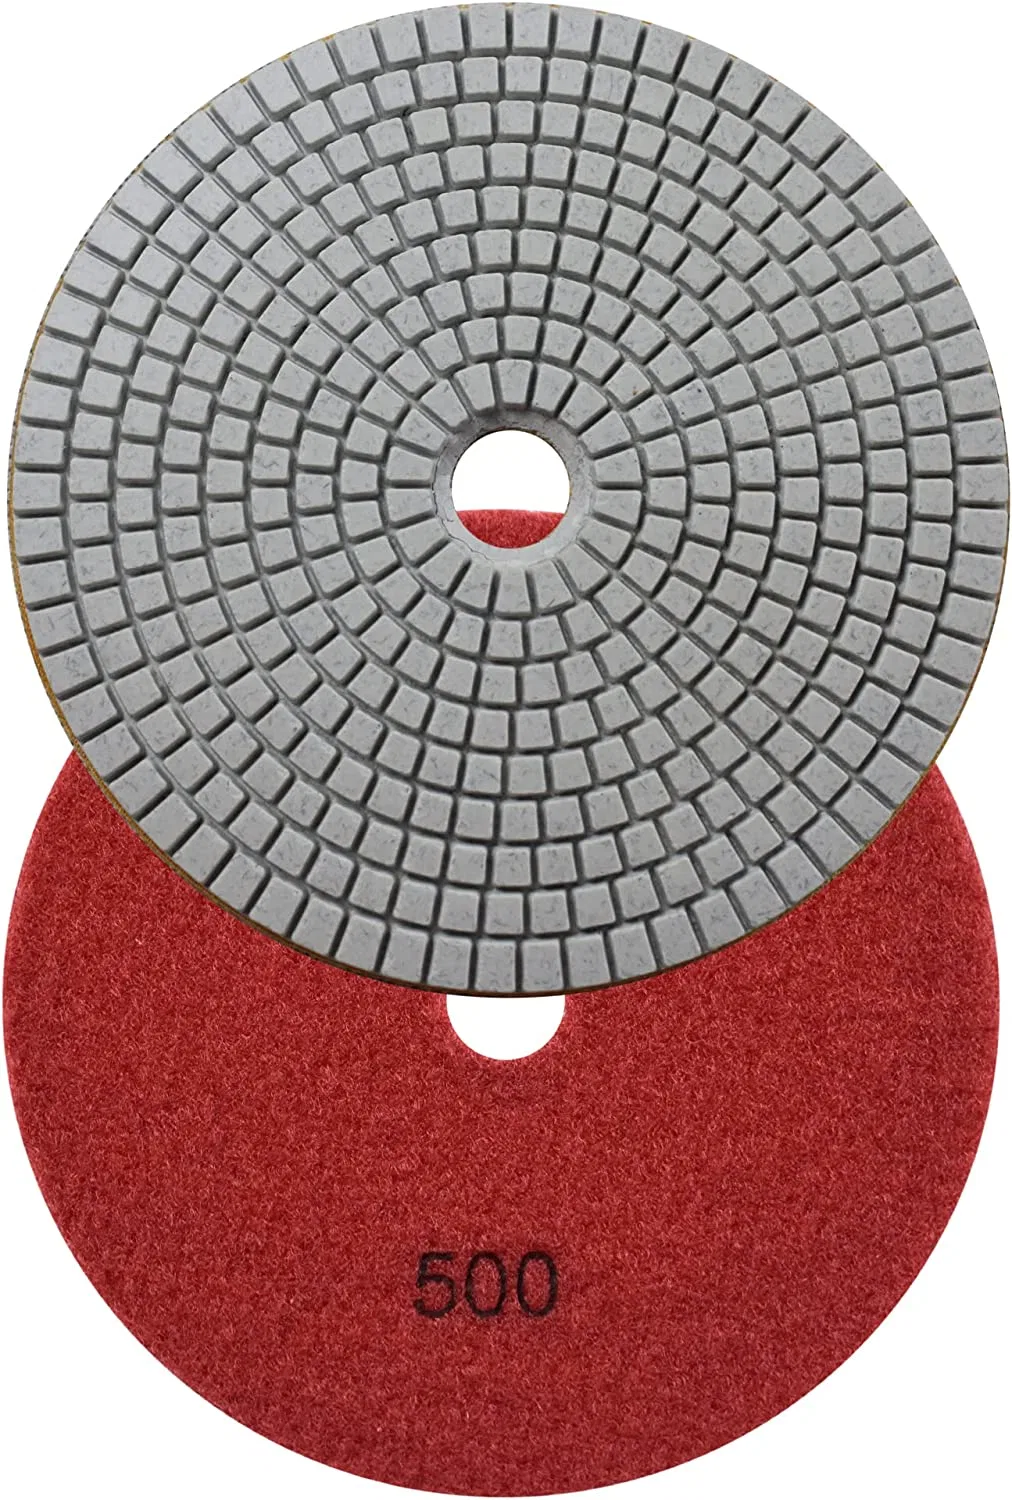 Diamond Polishing Pad Wettool 6 Inch for Grinding Stone Marble Granite Countertop Pack of 7 PCS